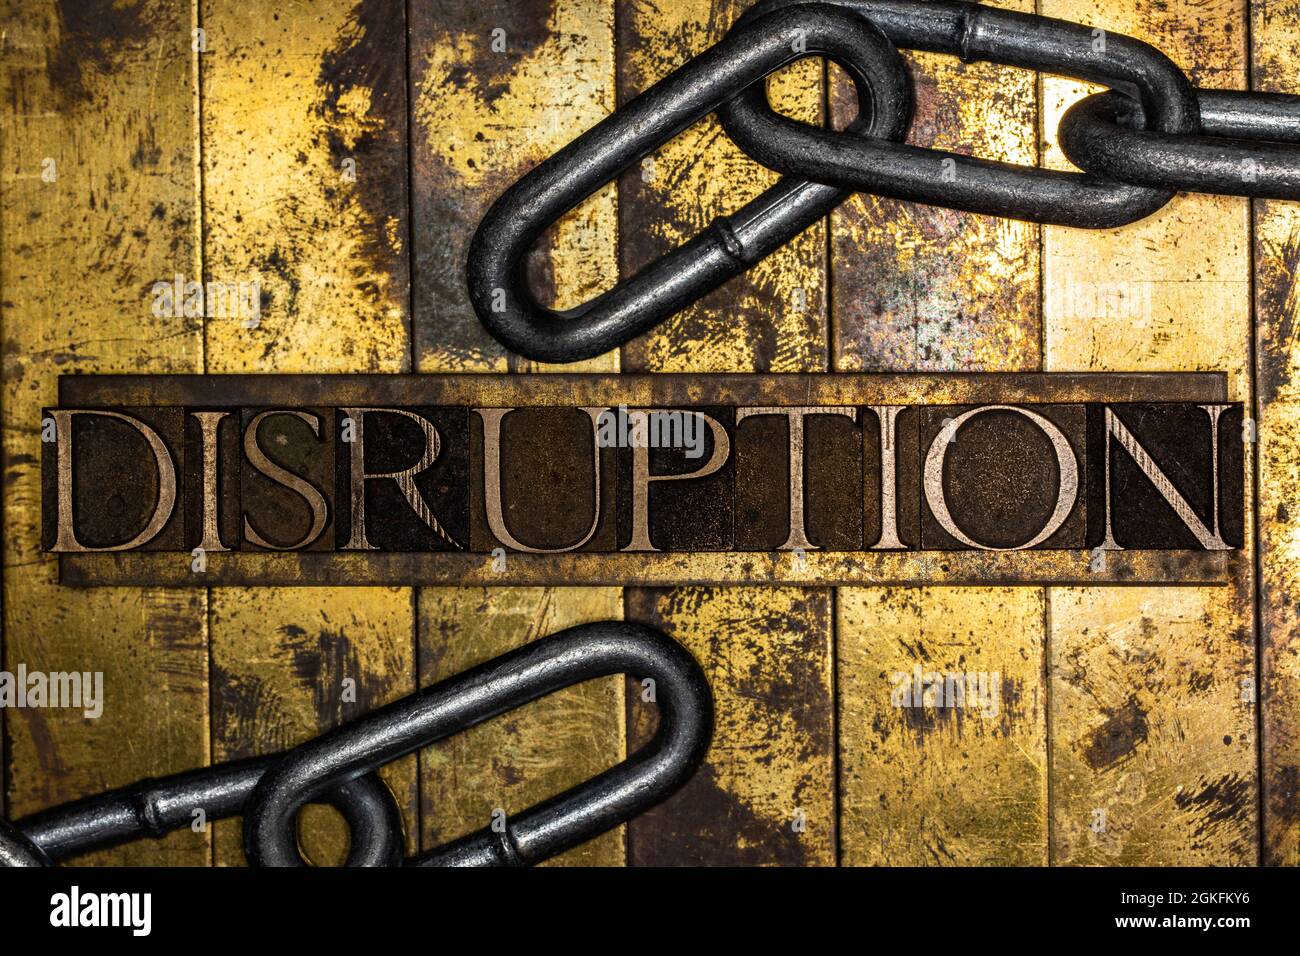 Disruption text with steel chain on vintage textured grunge copper and gold background Stock Photo